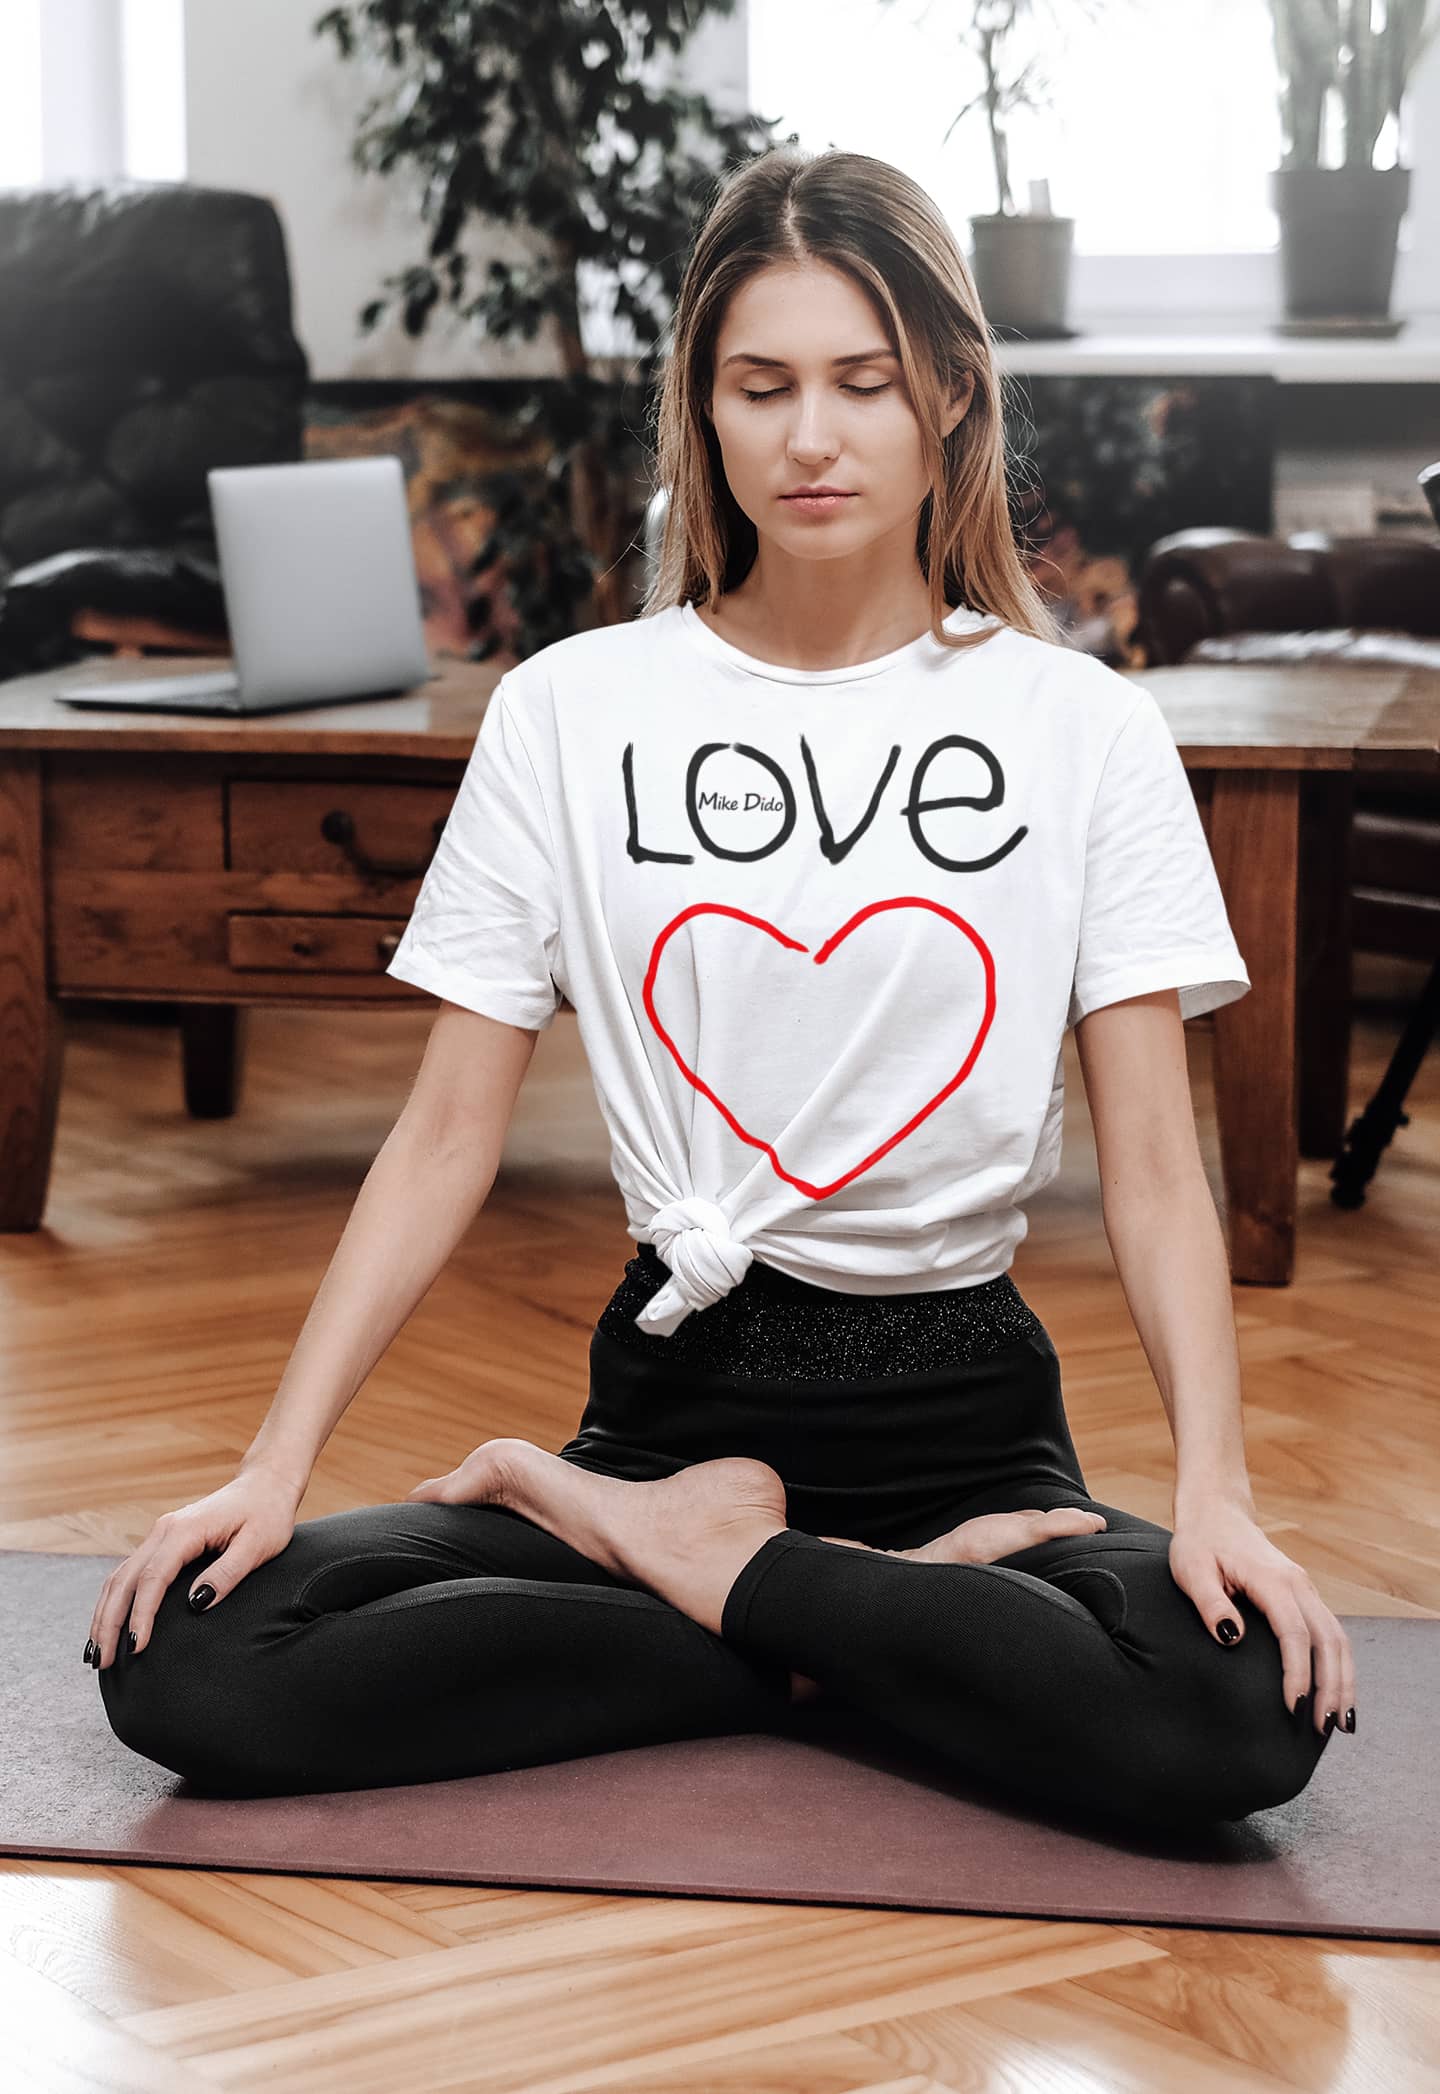 Yoga T-Shirt by Mike Dido